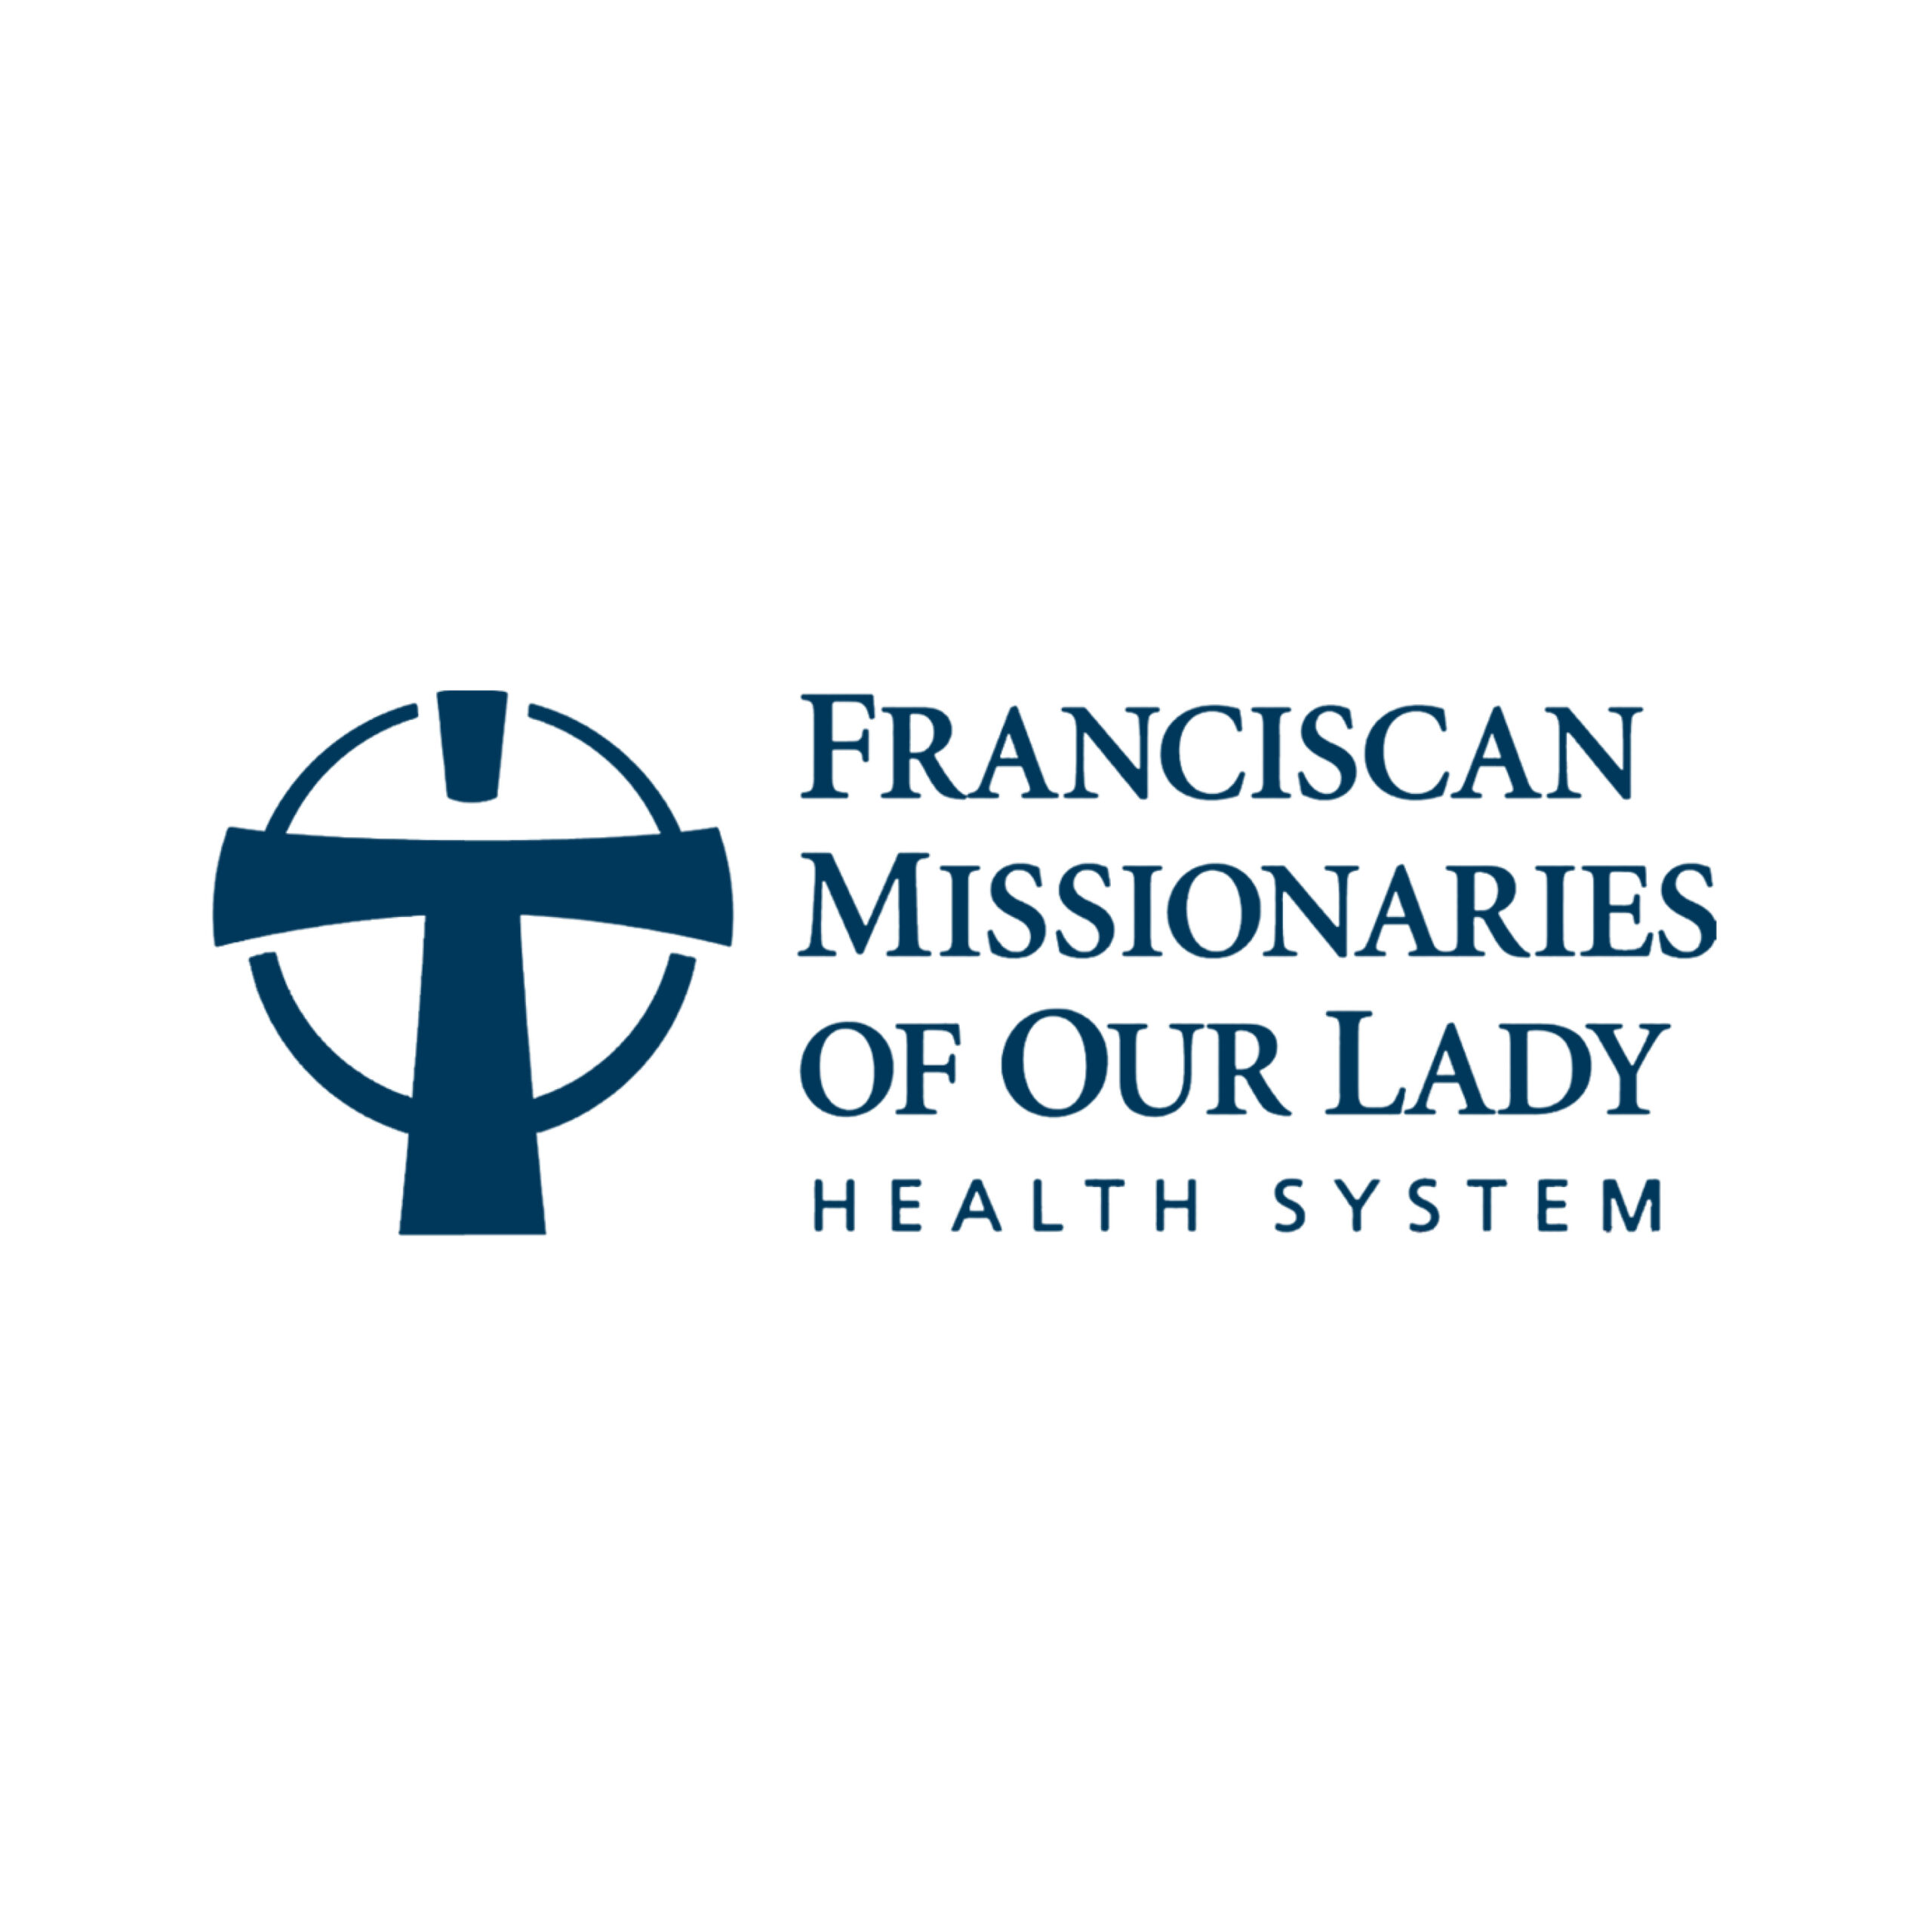 Franciscan Missionaries of our Lady Health System